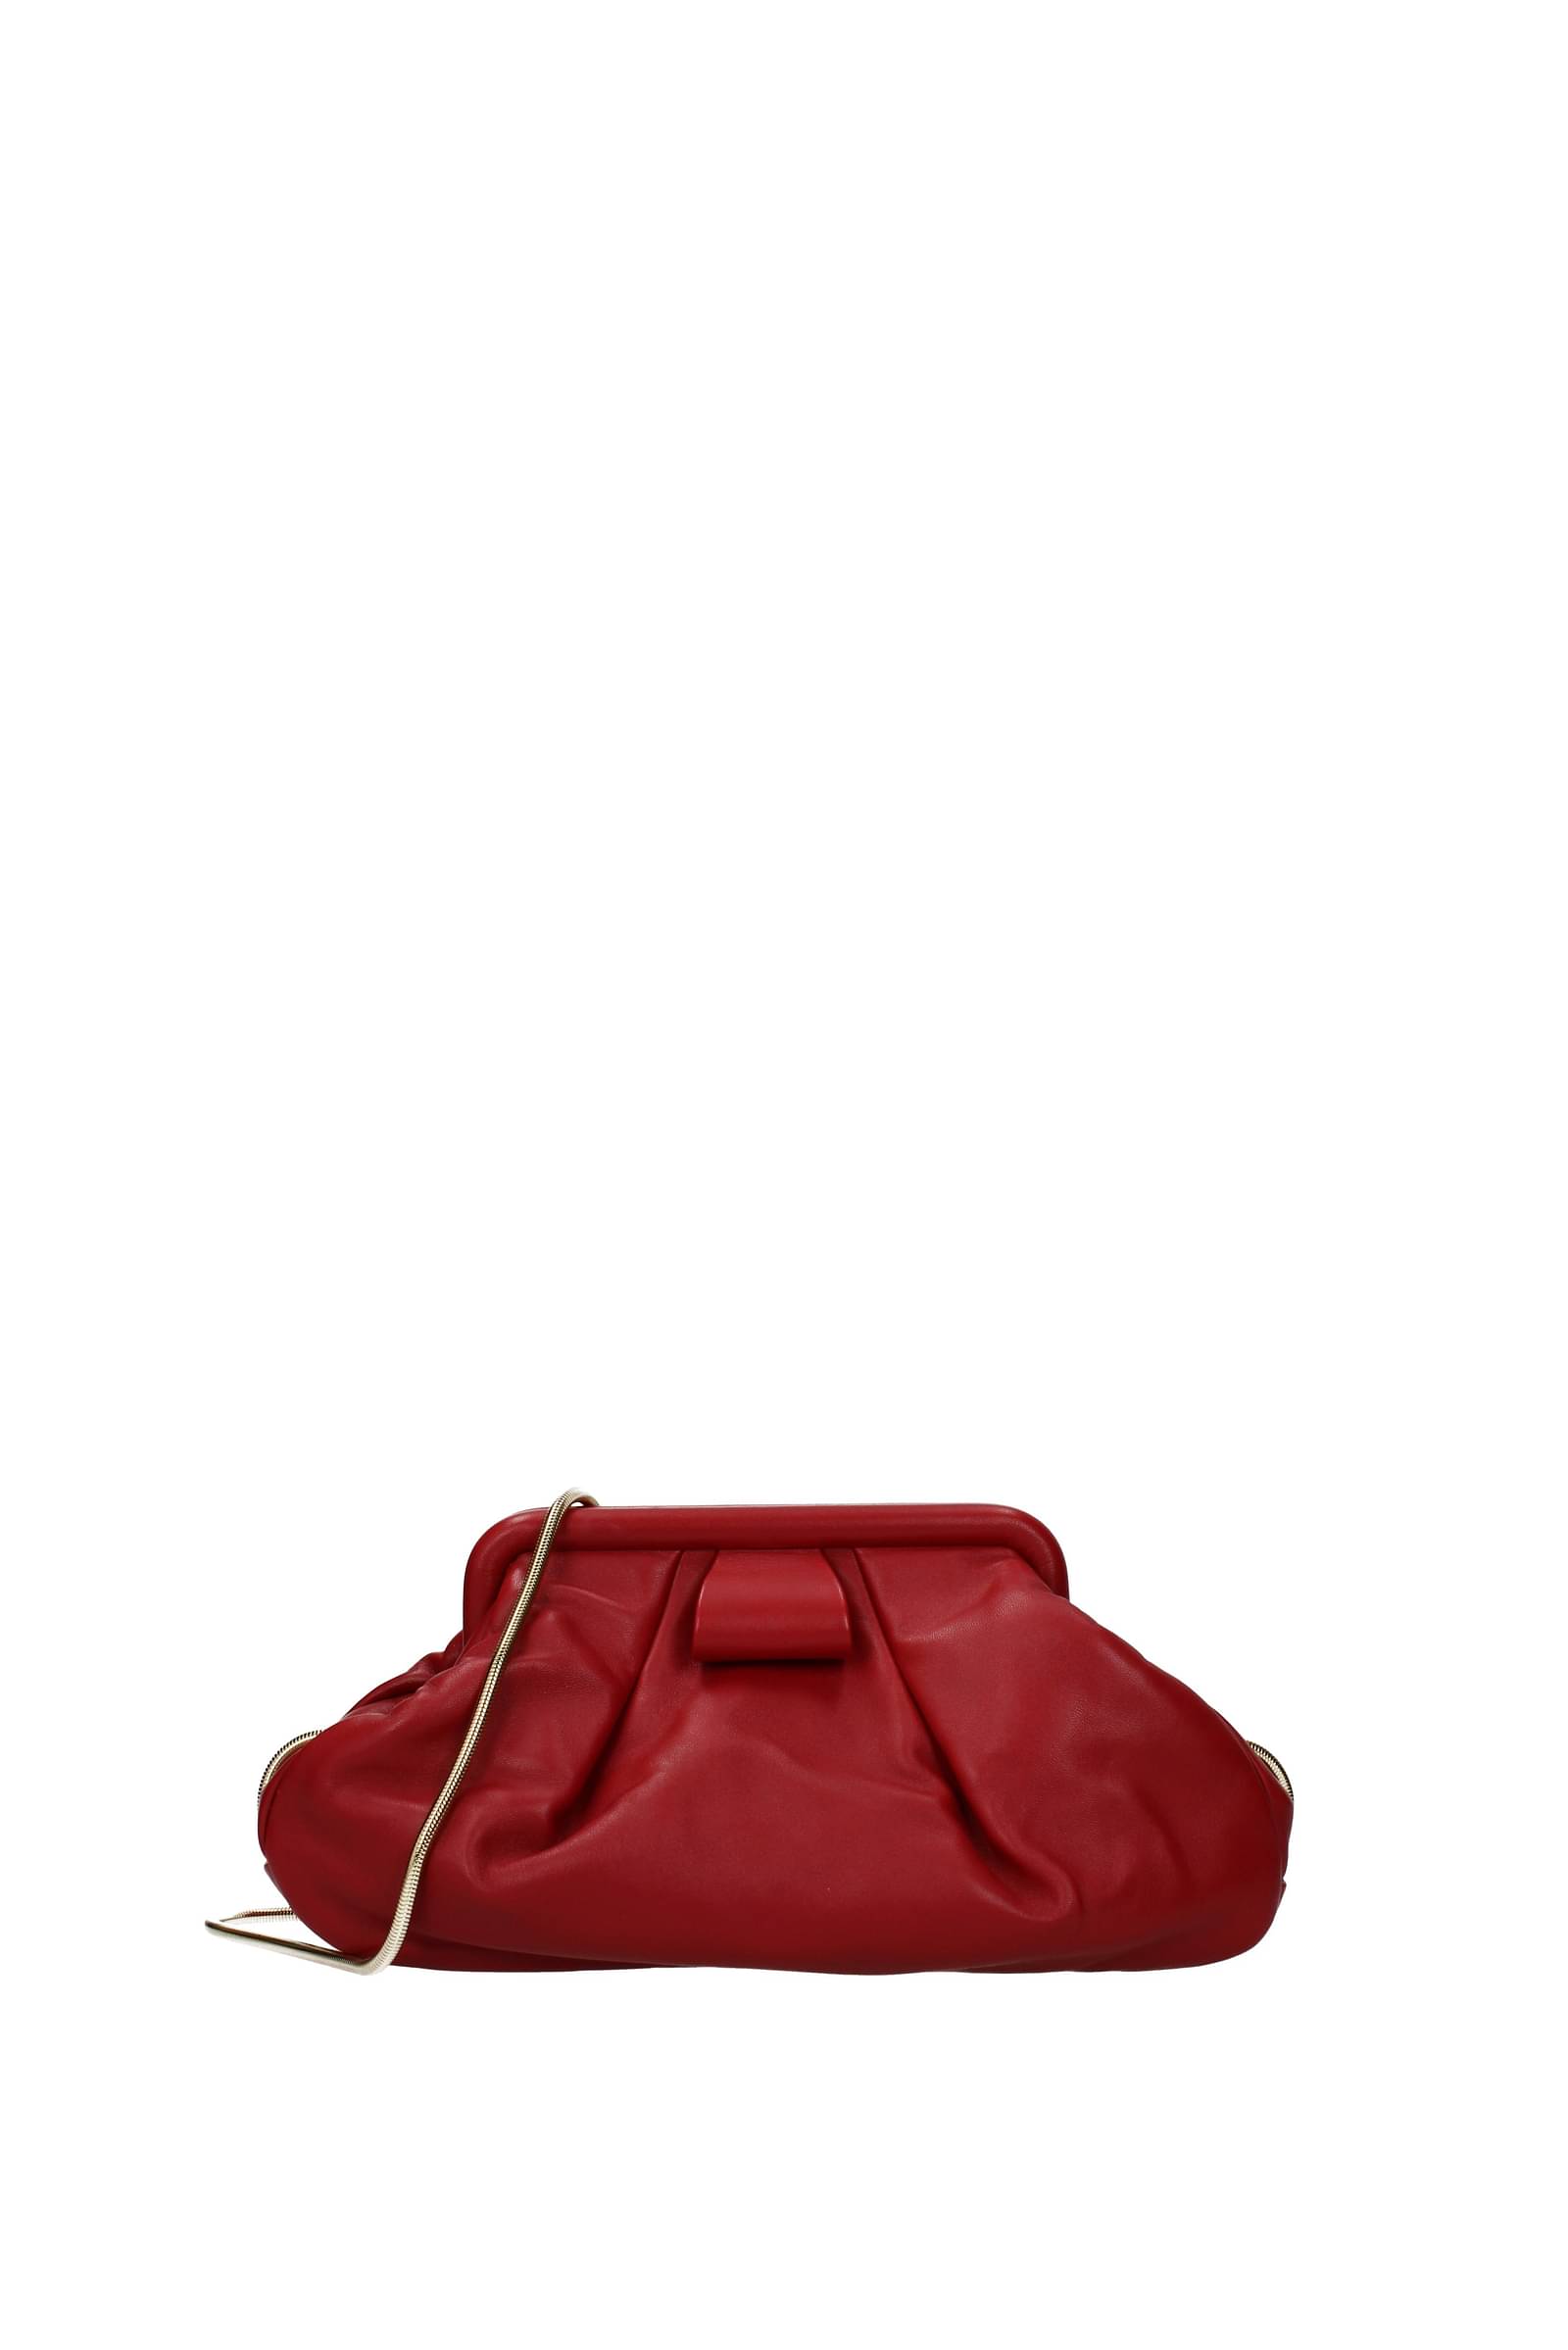 Womens Bags Clutches and evening bags Miu Miu Leather Handbag in Red 